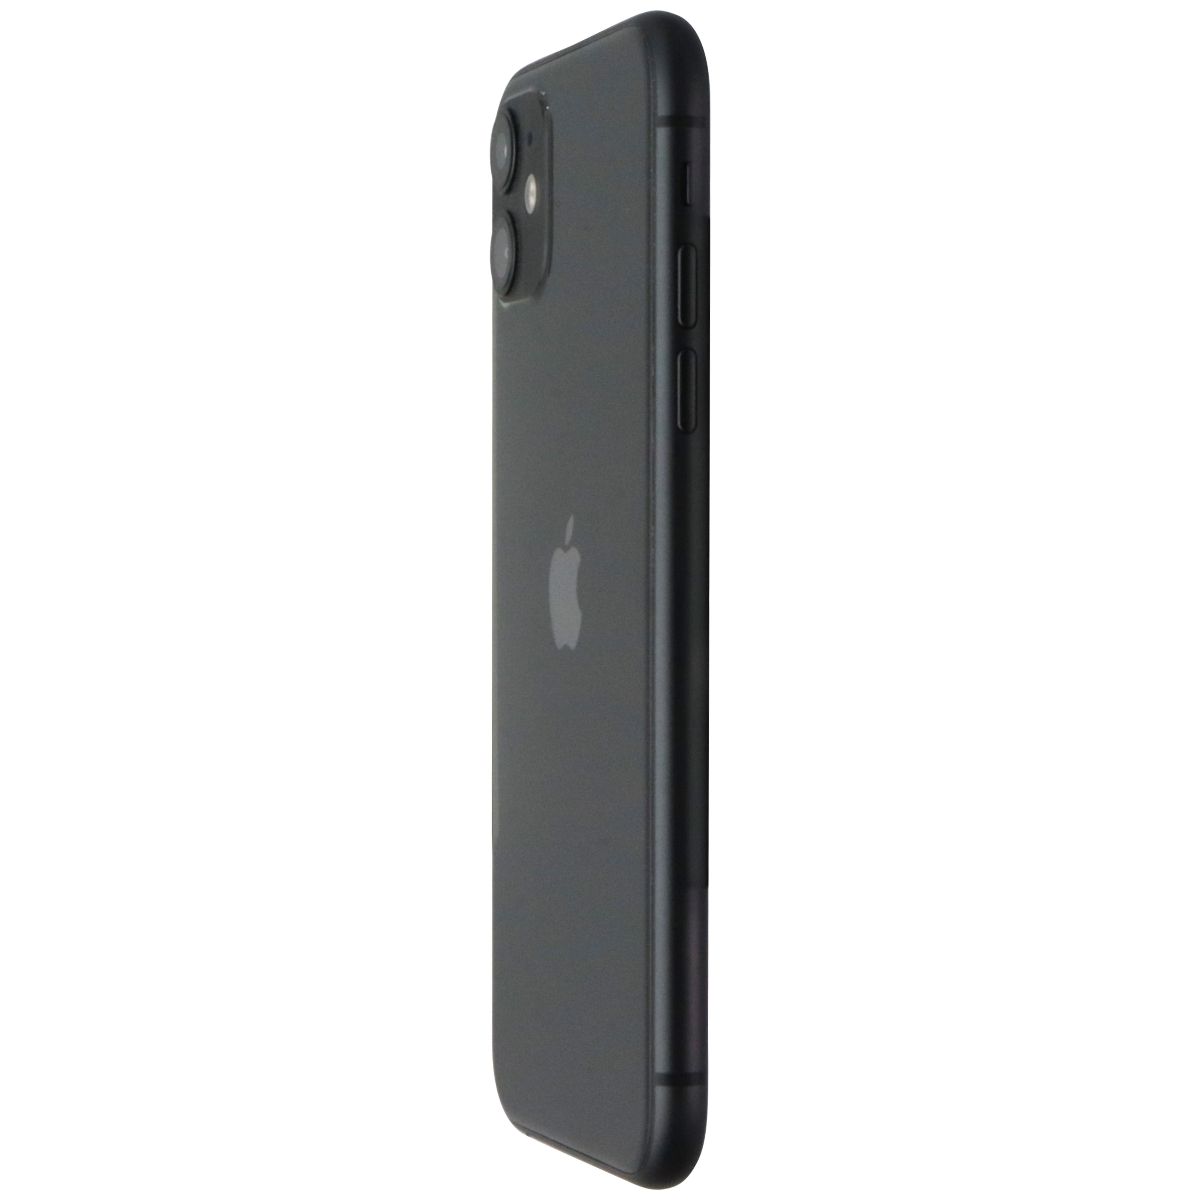 Apple iPhone 11 (6.1-inch) A2111 Dish Boost ONLY - 64GB / Black - Bad Face ID* Cell Phones & Smartphones Apple    - Simple Cell Bulk Wholesale Pricing - USA Seller